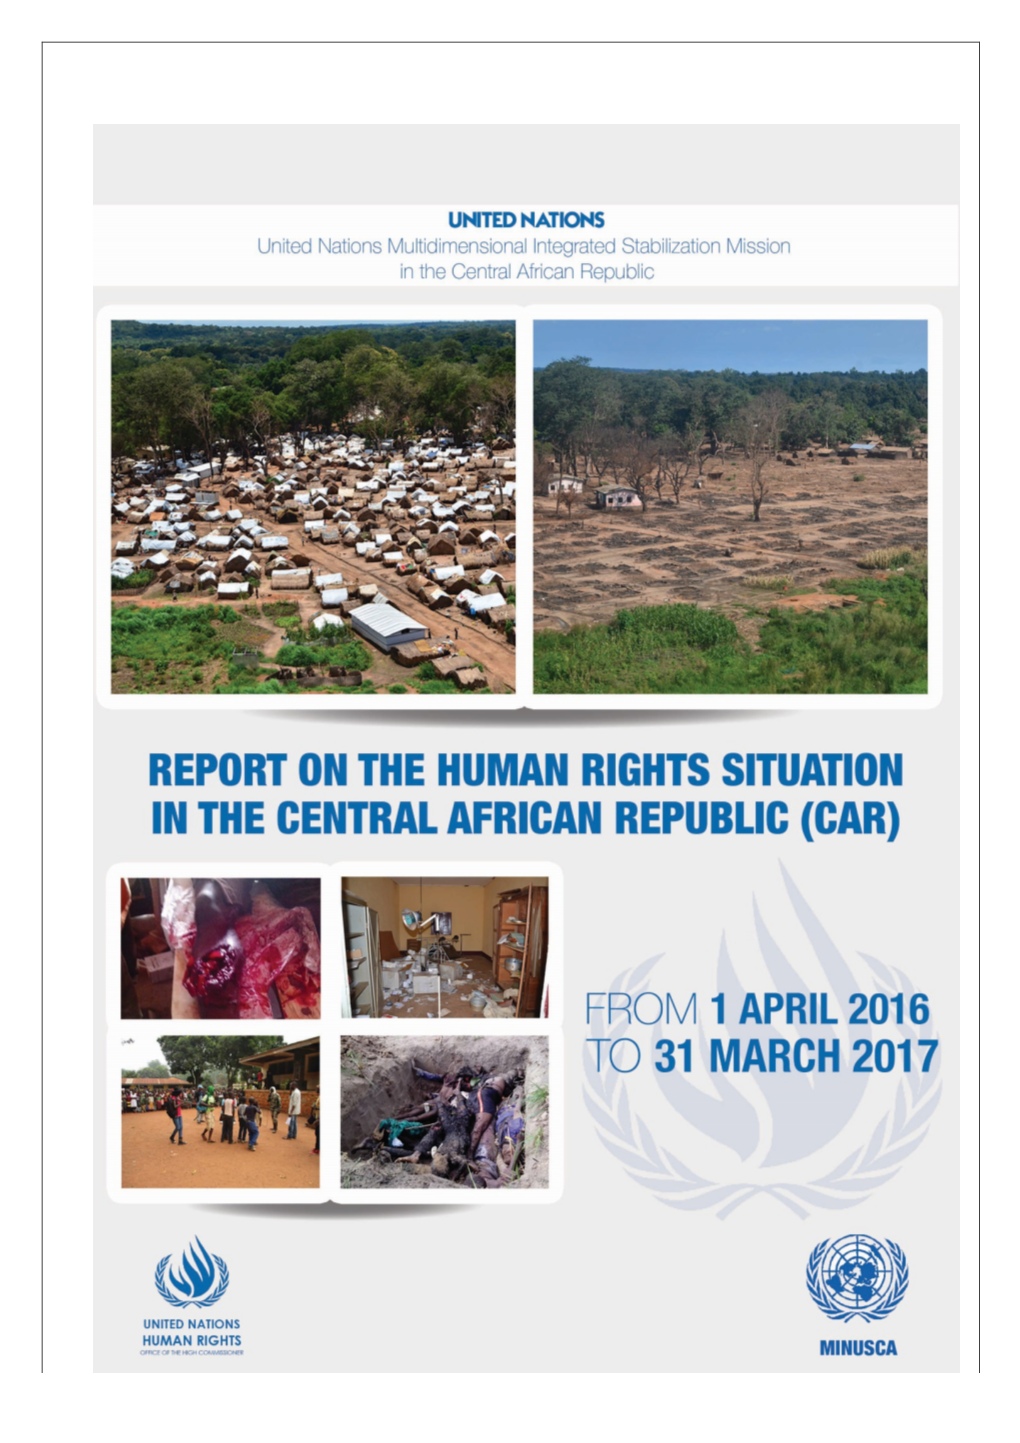 Report on the Human Rights Situation in Central African Republic